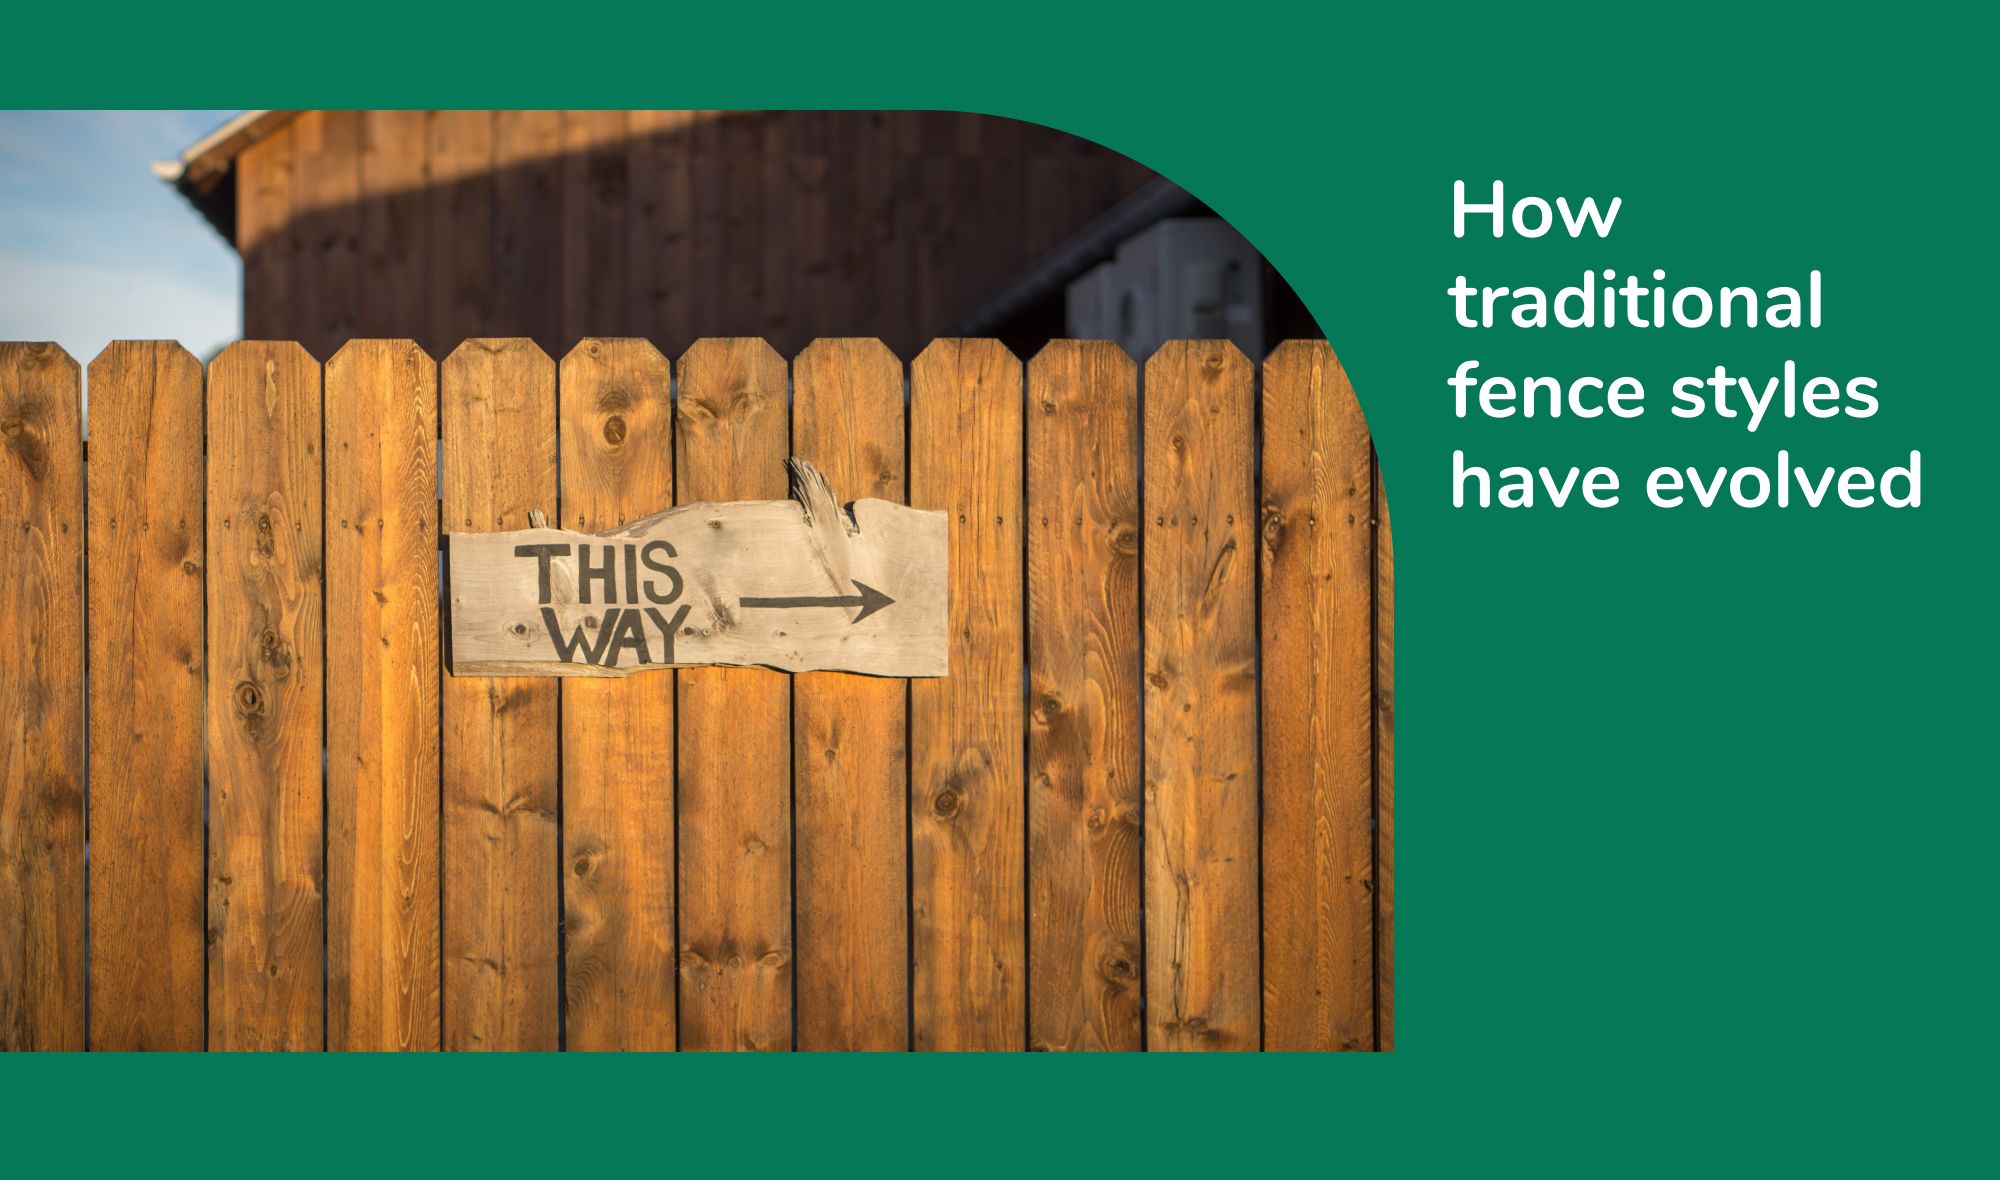 How traditional fence styles have evolved and their influence on modern fencing options